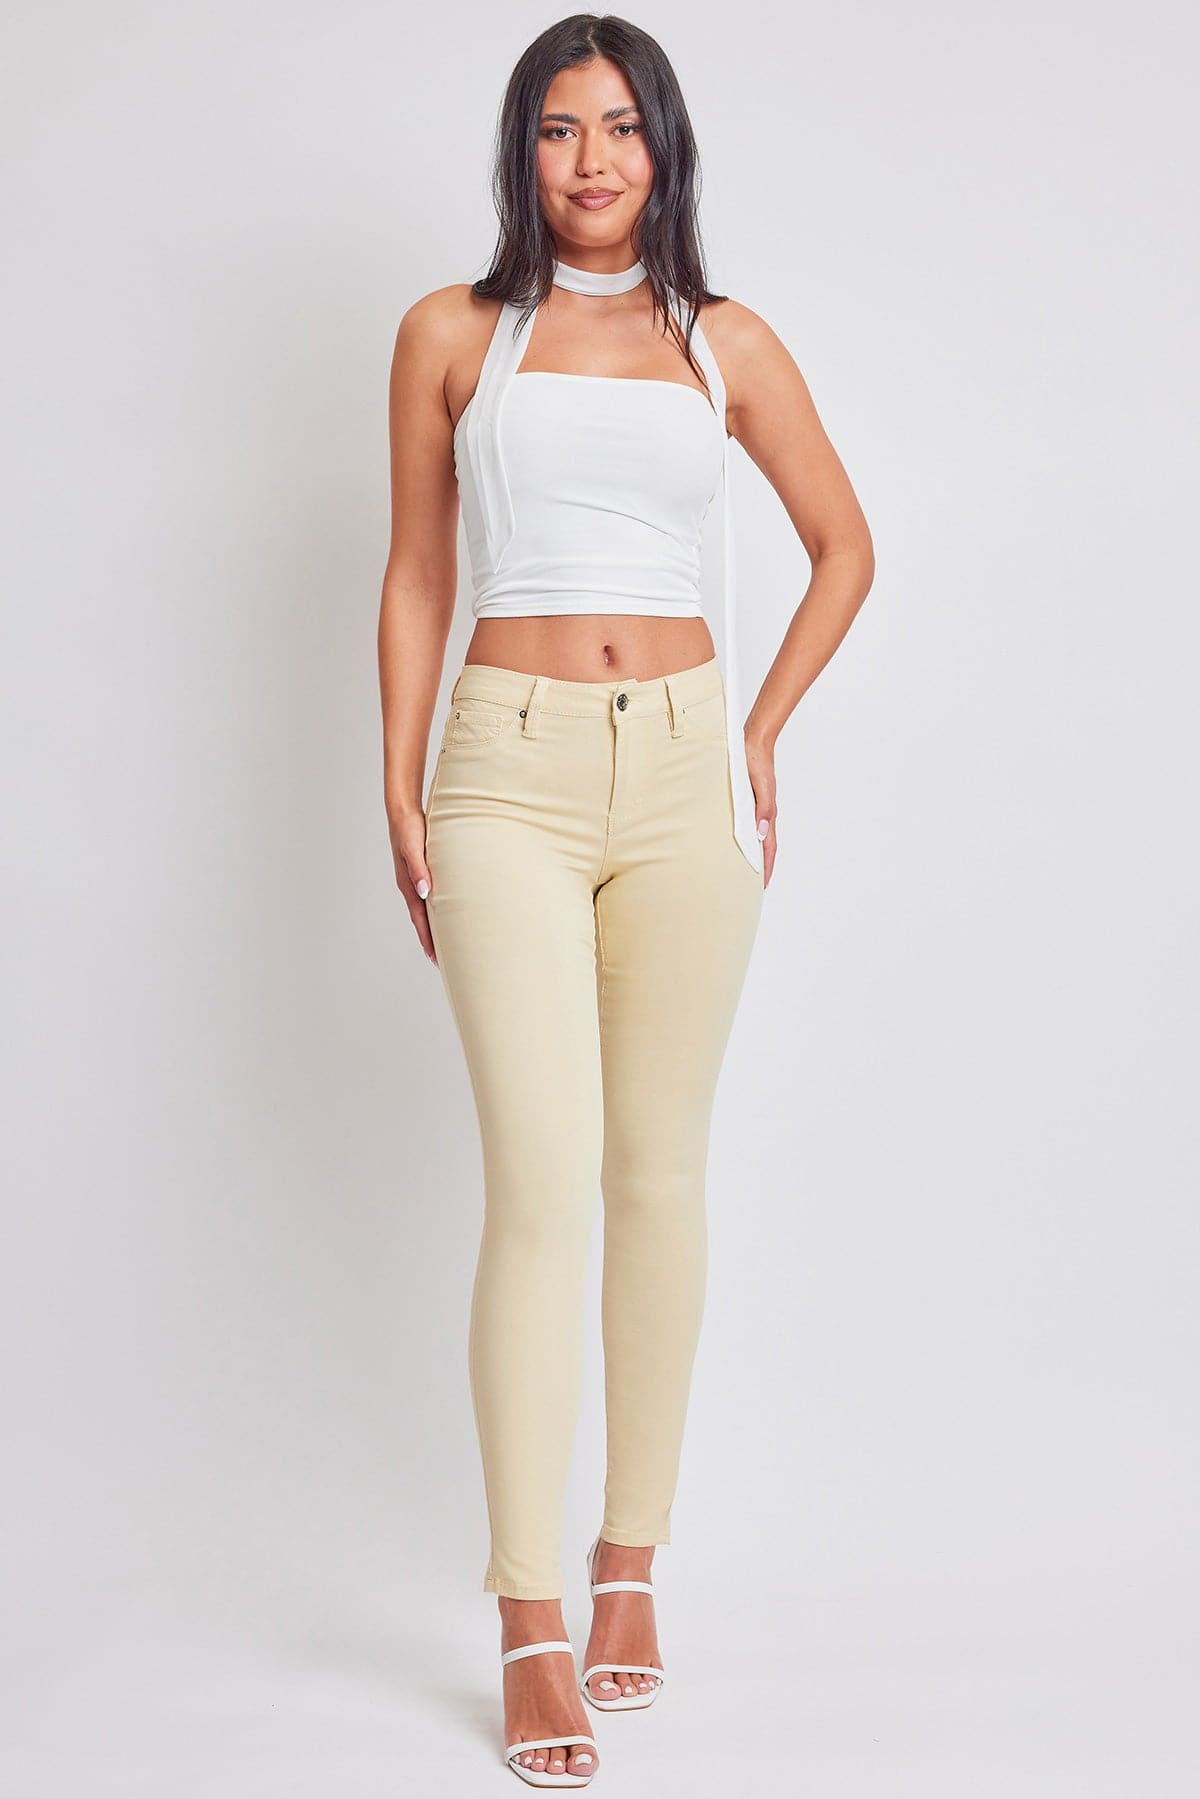 Women's Hyperstretch Forever Color Pants - Pastel